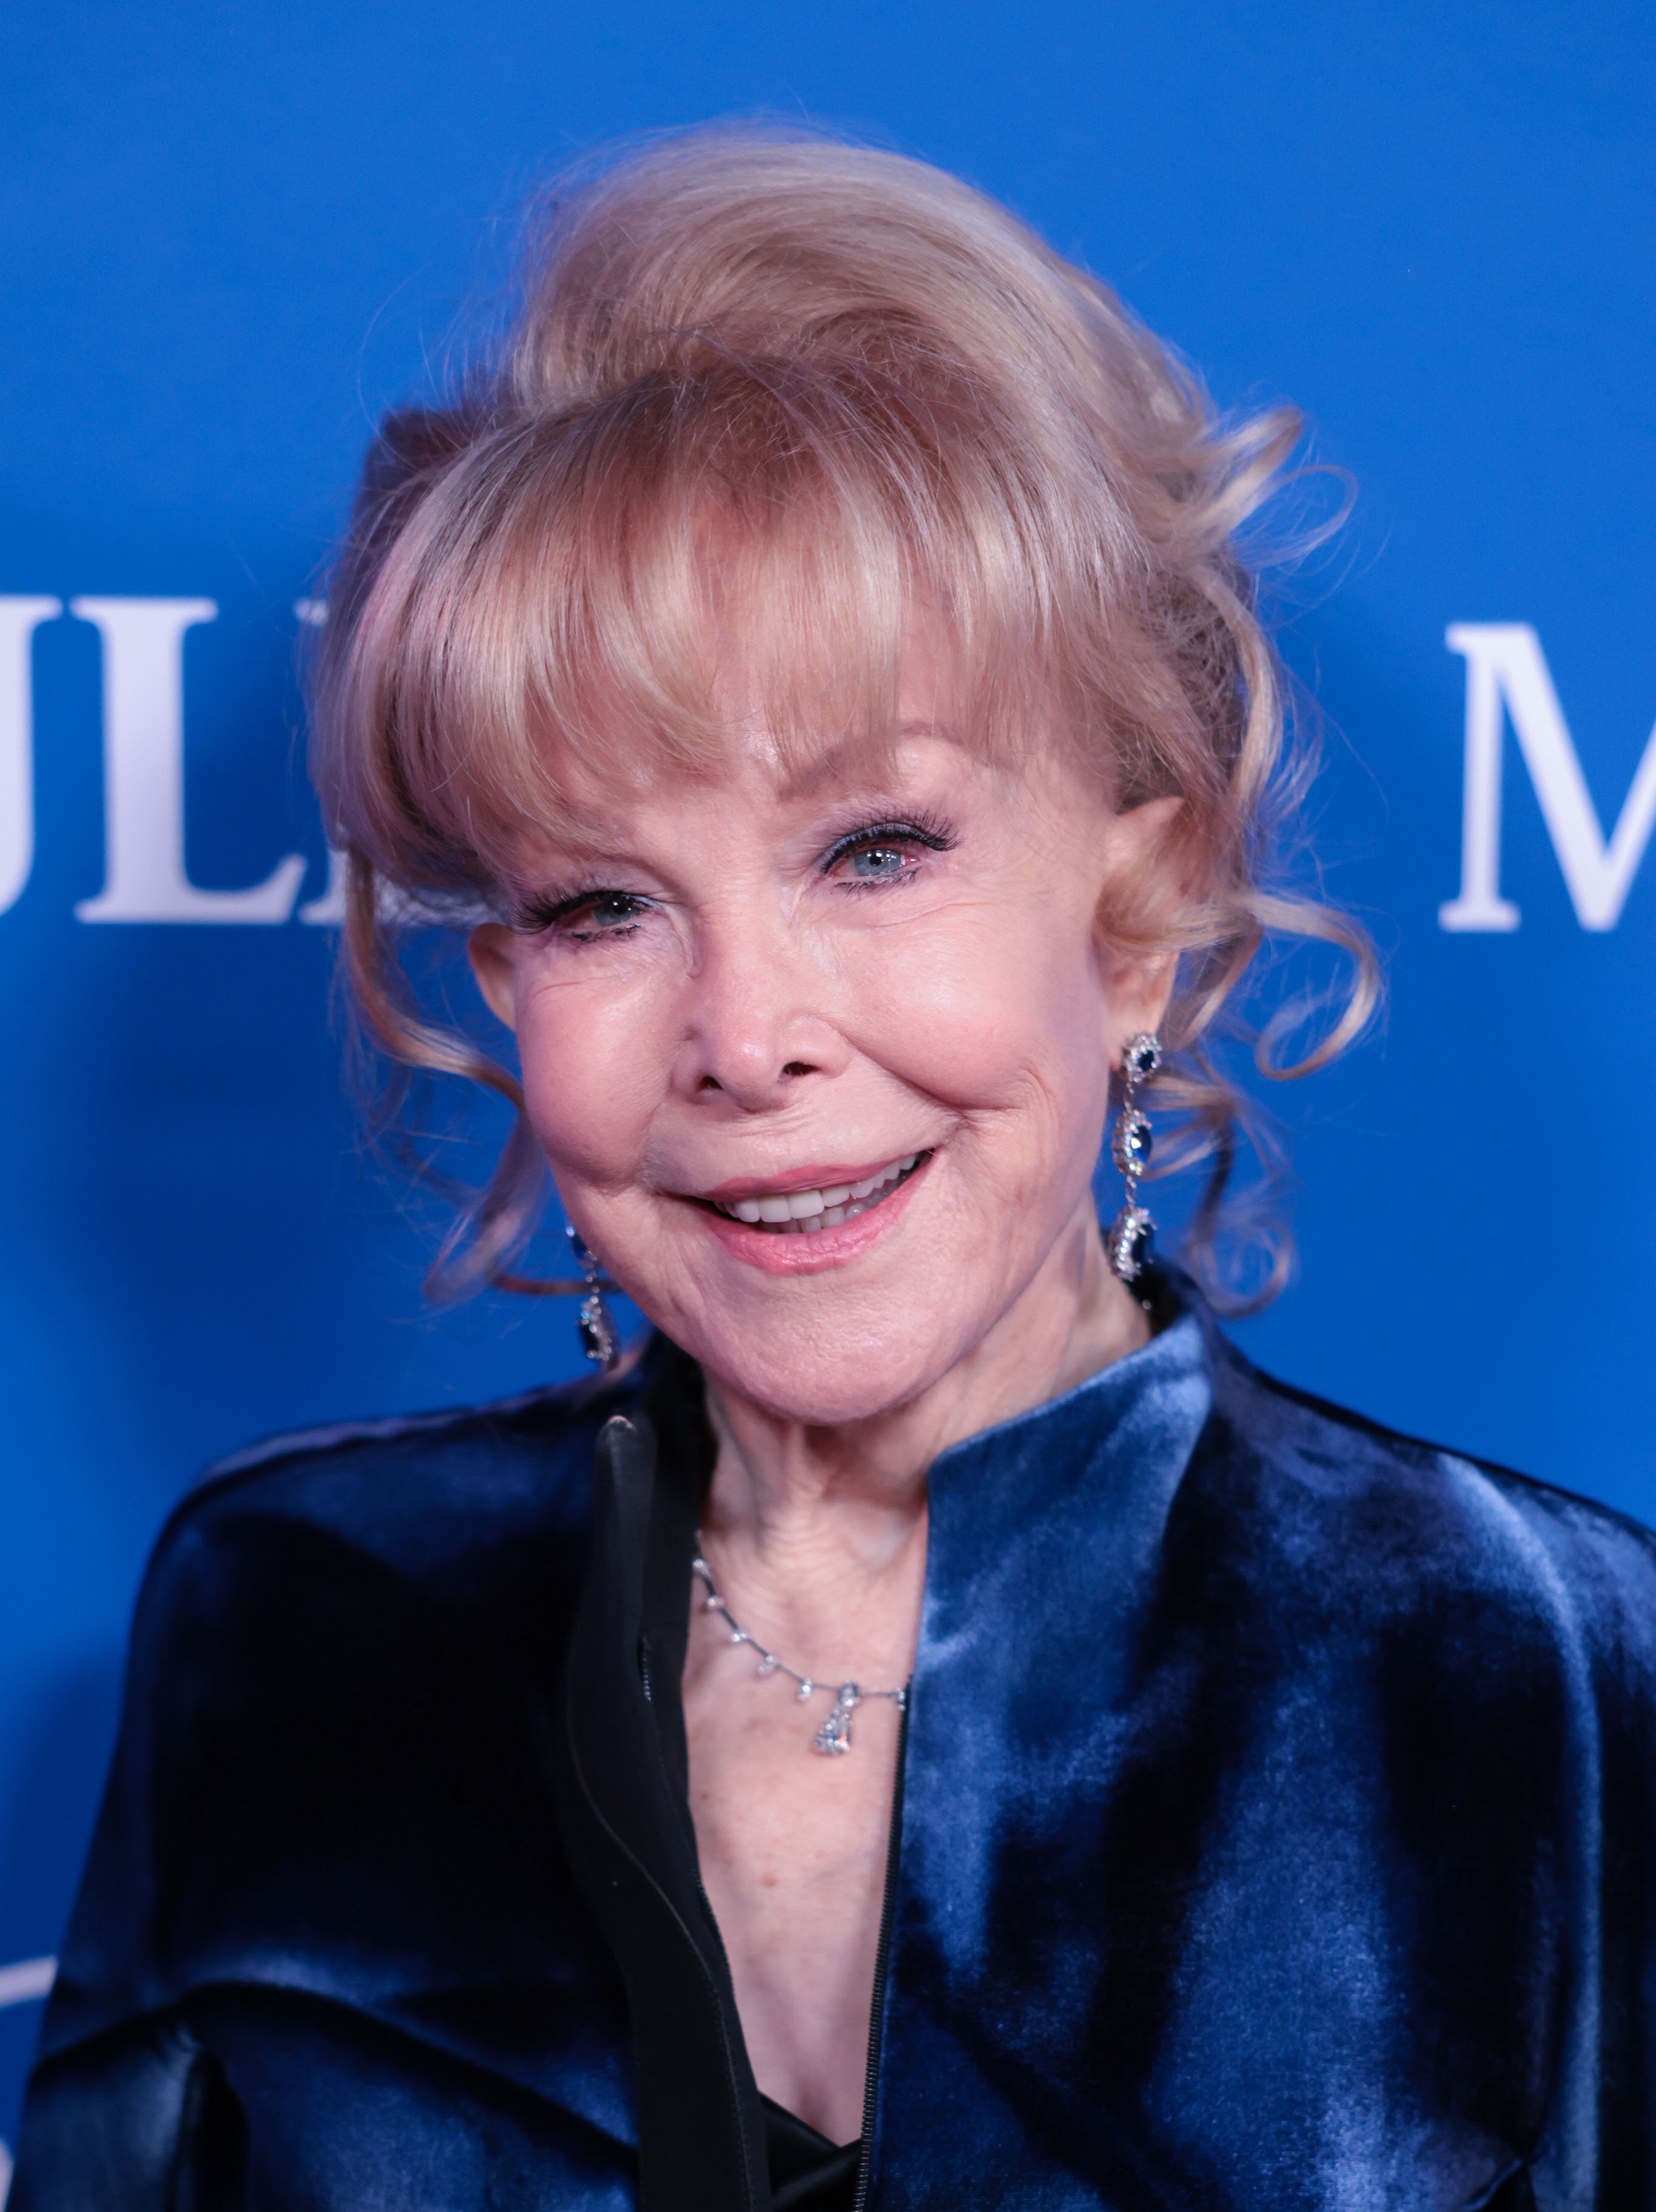 Barbara Eden attends Make-A-Wish Greater LA's Wish Gala 2022 presented by Gibson Dunn at Paramount Studios on November 19, 2022, in Hollywood, California. | Source: Getty Images